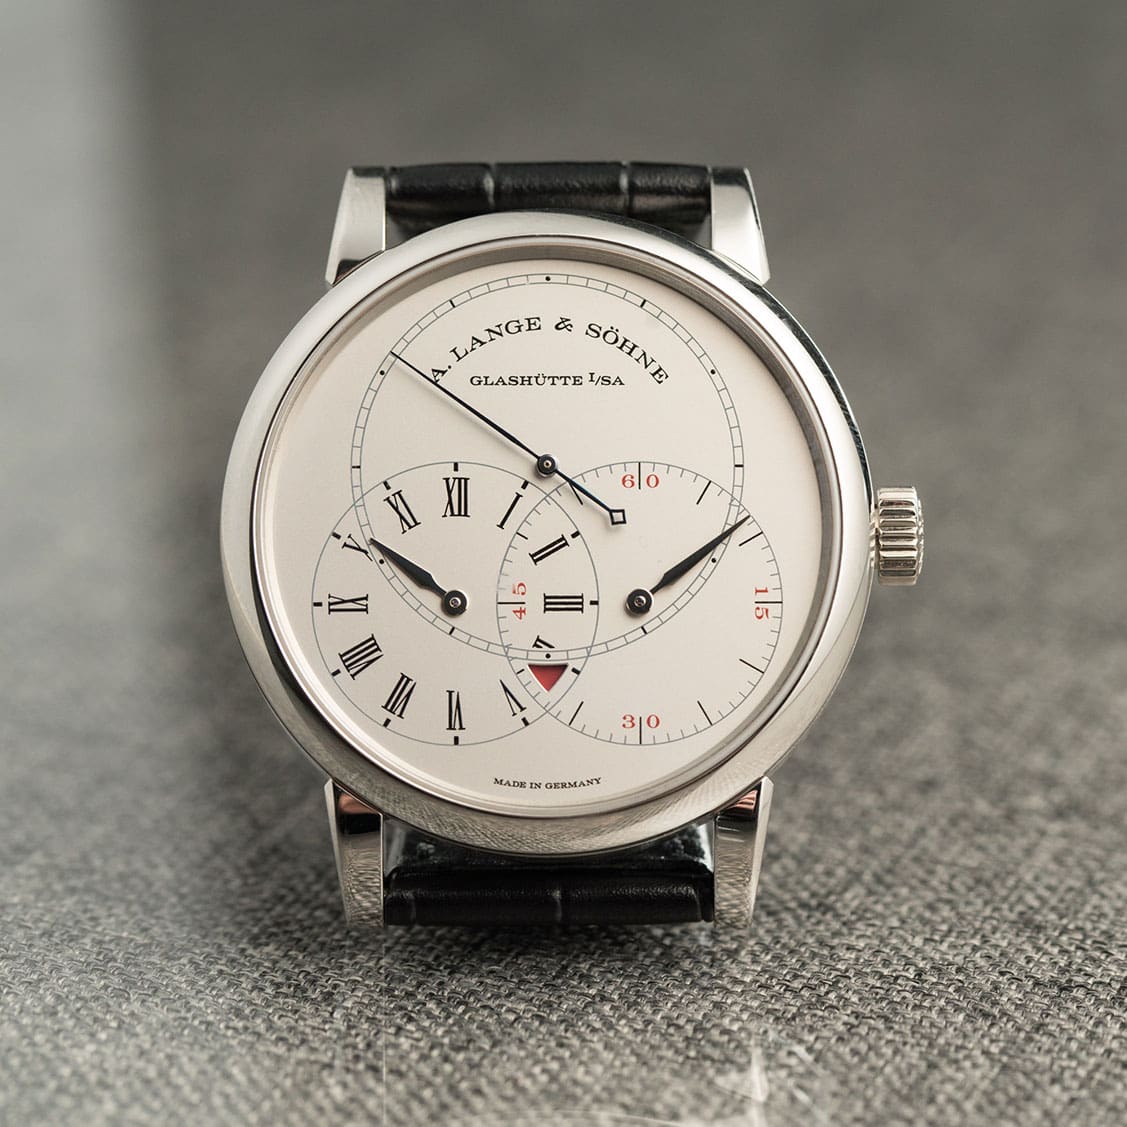 EDITOR’S PICK: Our A. Lange & Söhne Richard Lange Jumping Seconds video review